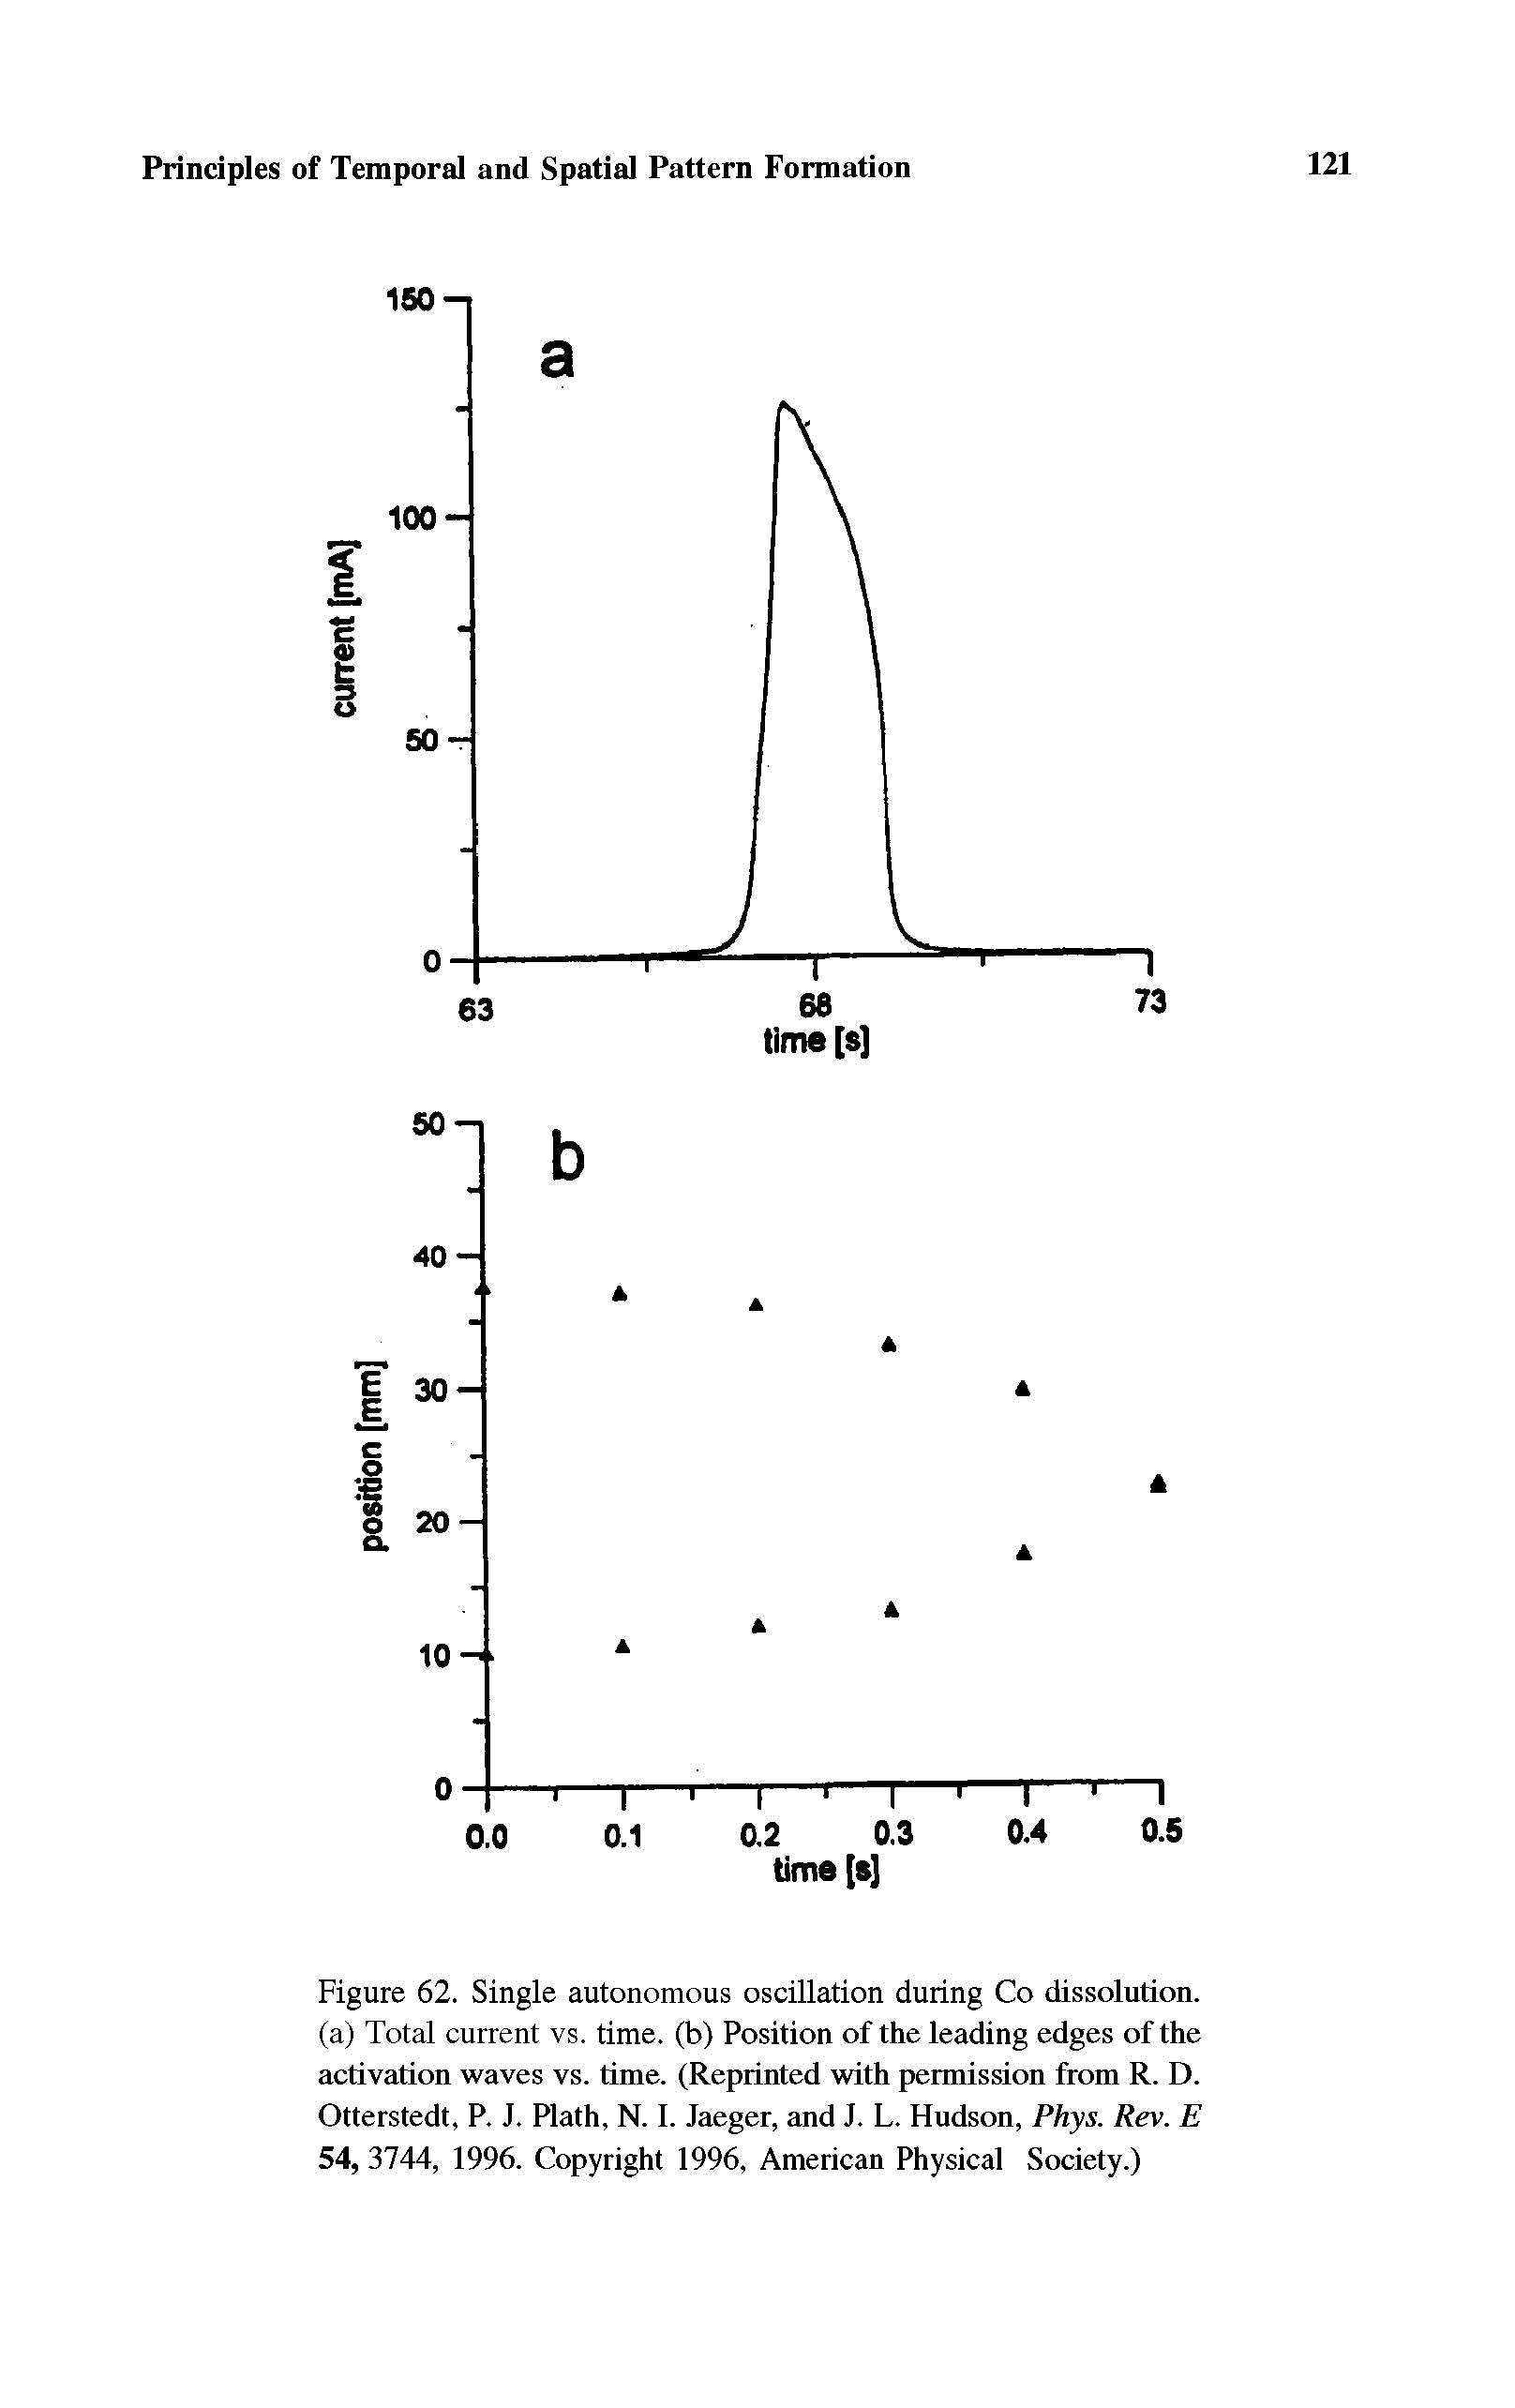 Figure 62. Single autonomous oscillation during Co dissolution, (a) Total current vs. time, (b) Position of the leading edges of the activation waves vs. time. (Reprinted with permission from R. D. Otterstedt, P. J. Plath, N. 1. Jaeger, and J. L. Hudson, Phys. Rev. E 54, 3744, 1996. Copyright 1996, American Physical Society.)...